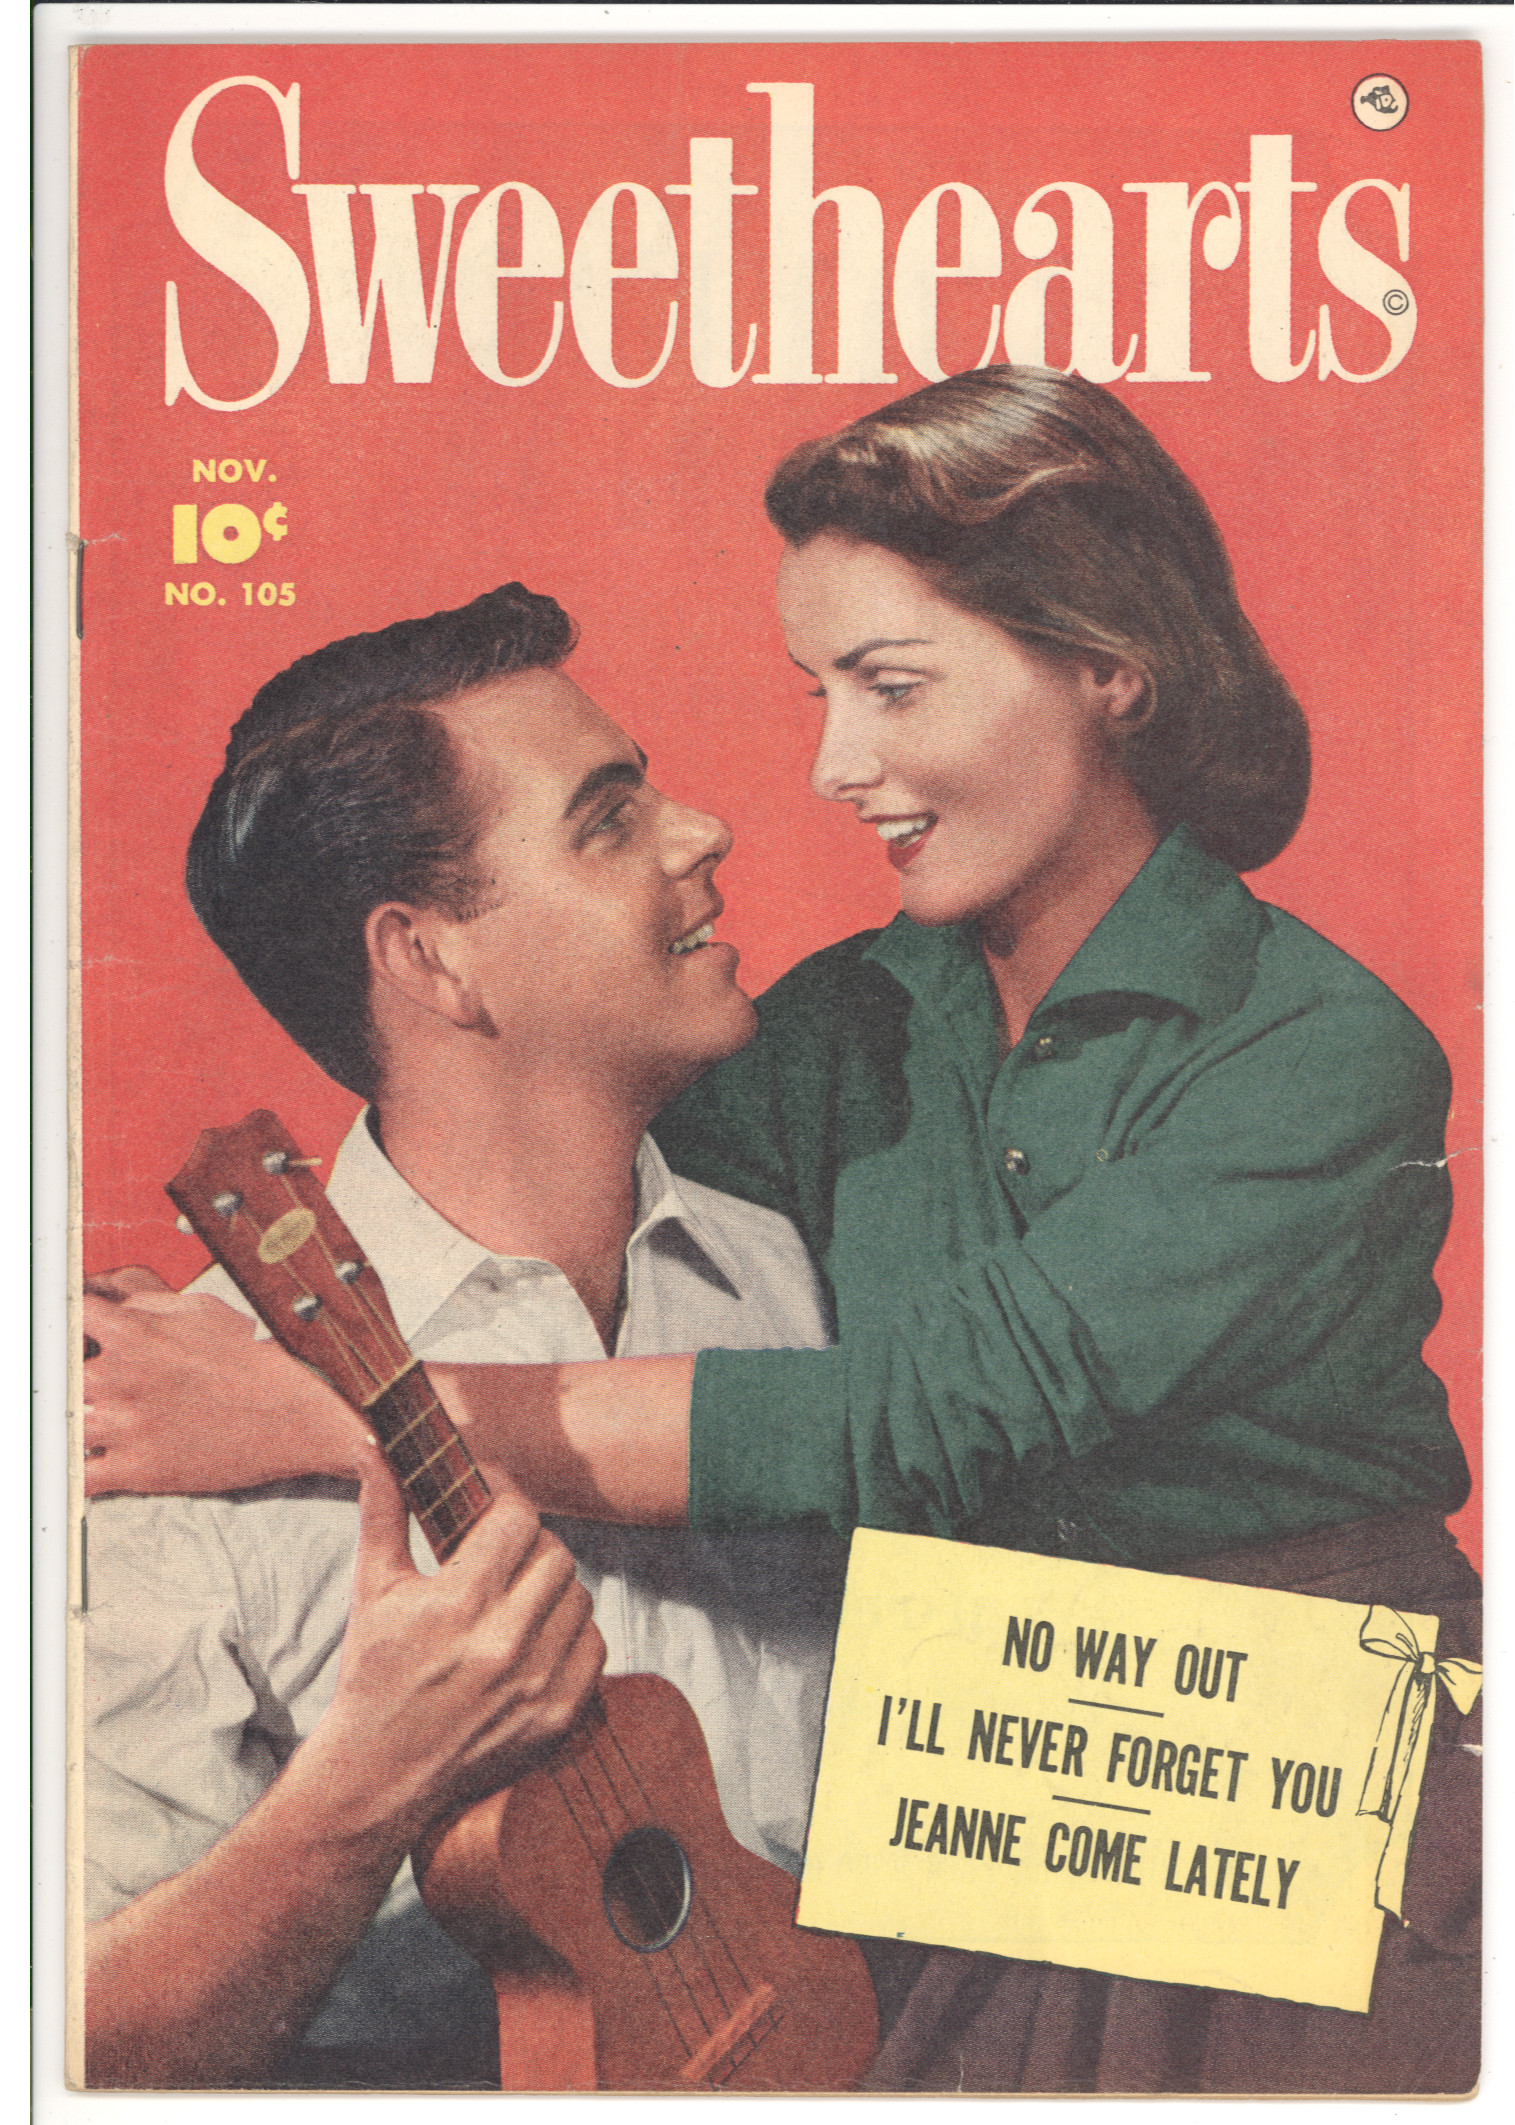 Sweethearts #105 front